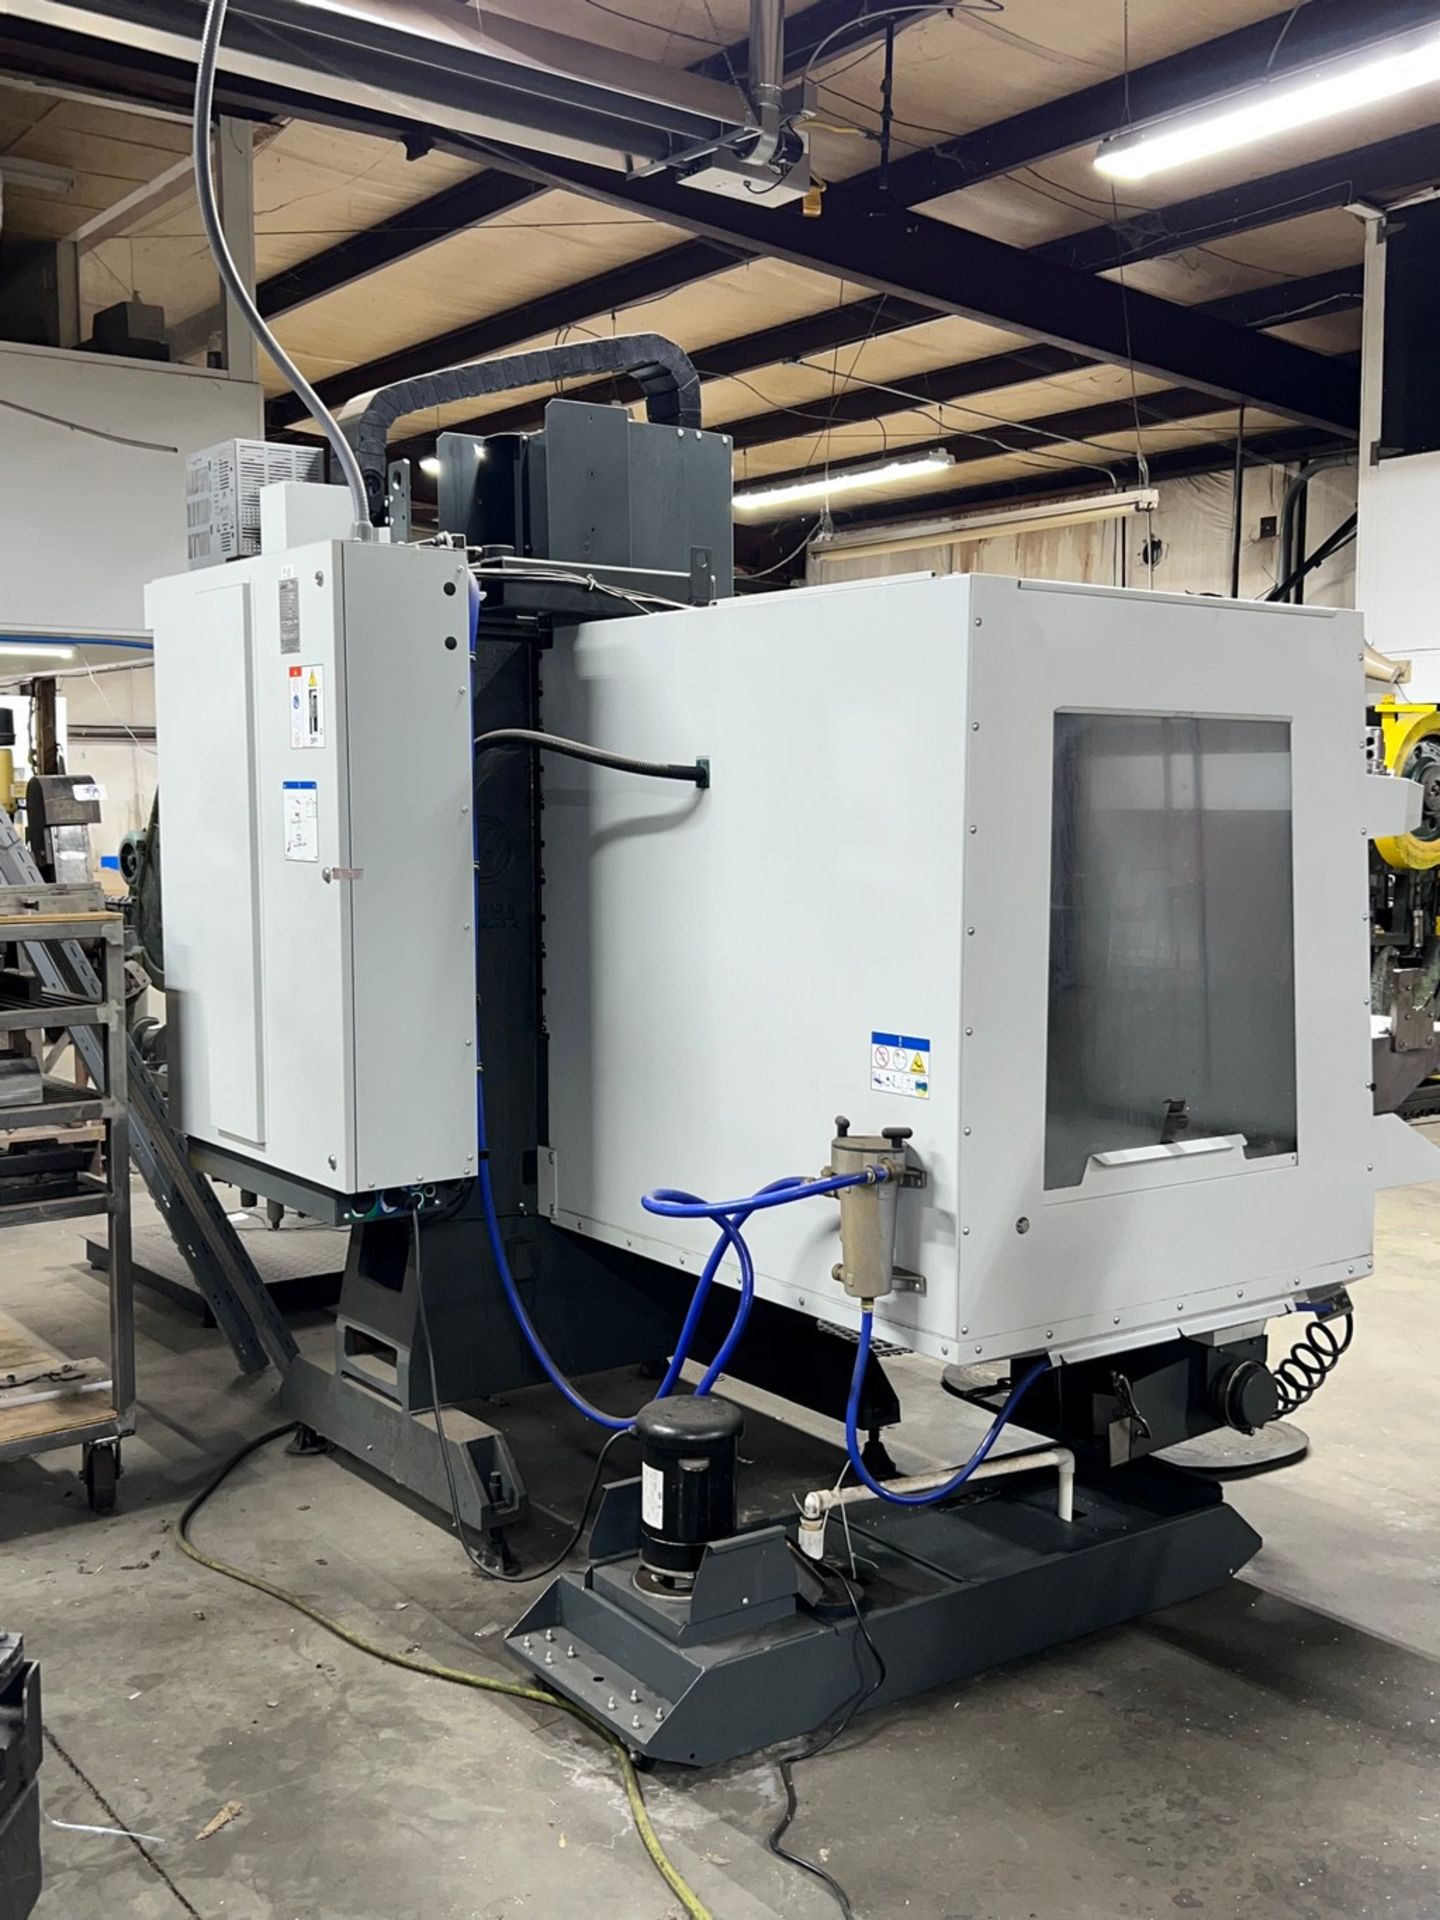 2018 Haas TM-2P CNC Vertical Mill - Image 3 of 16